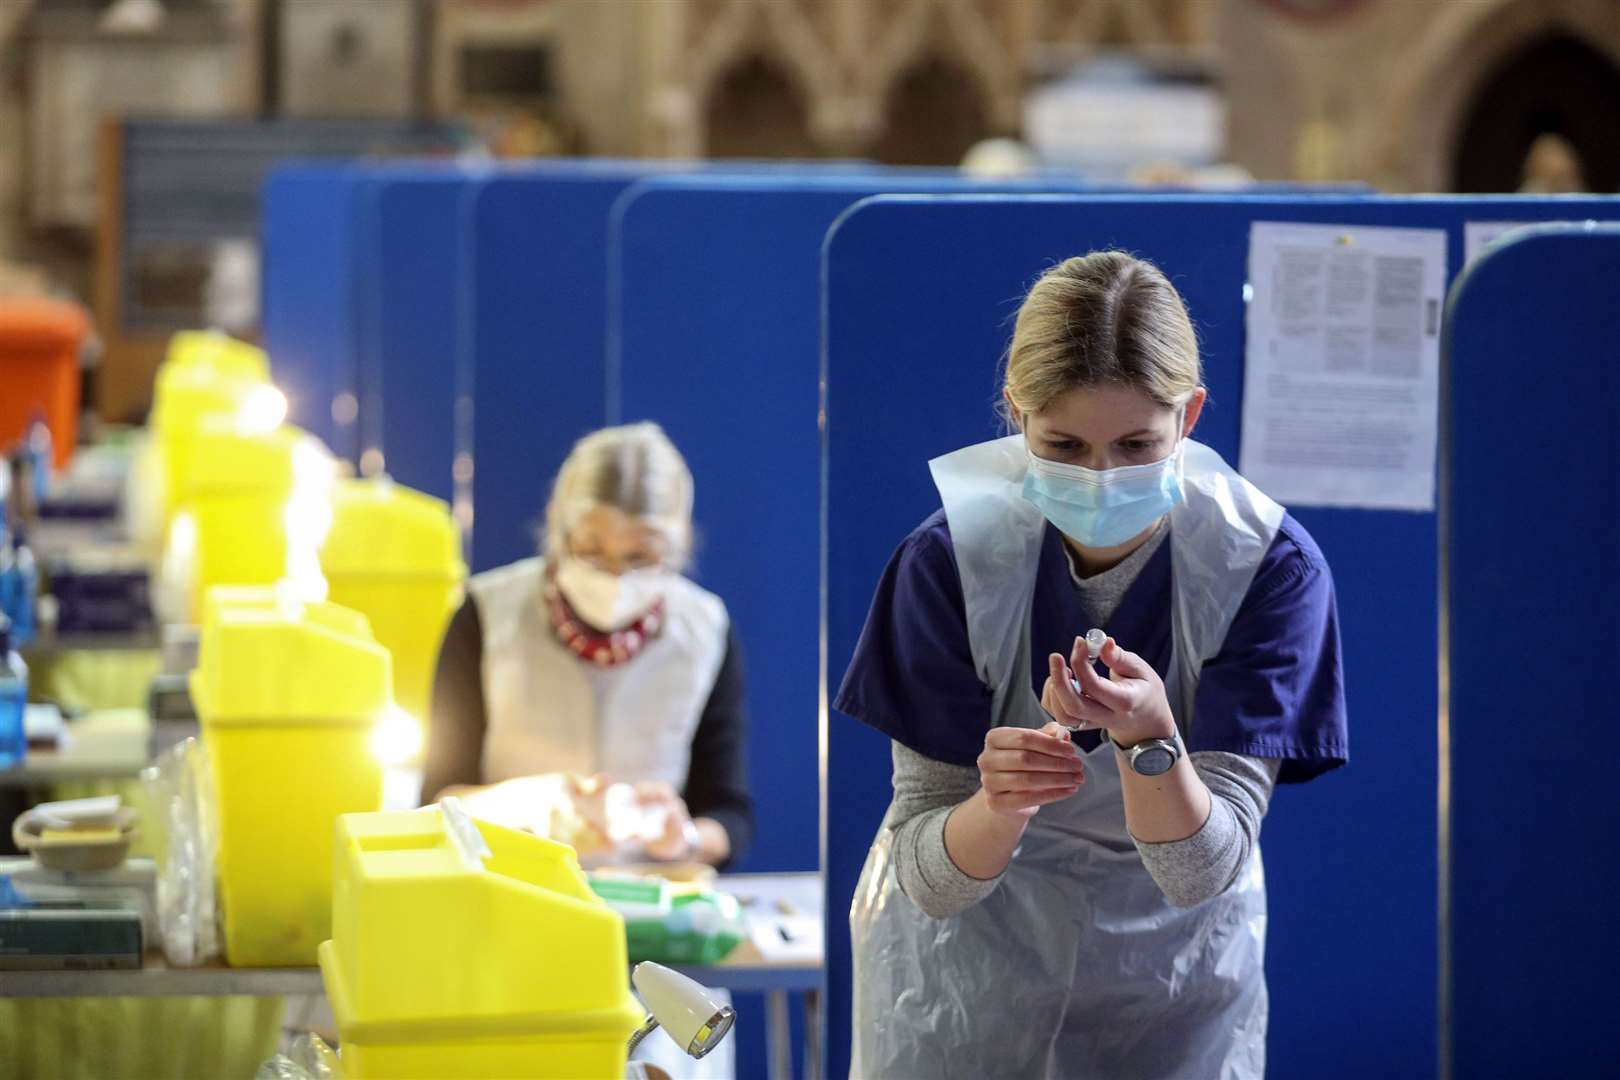 The third jab will be given out at Covid vaccination centres like this one. Photo: PA Media